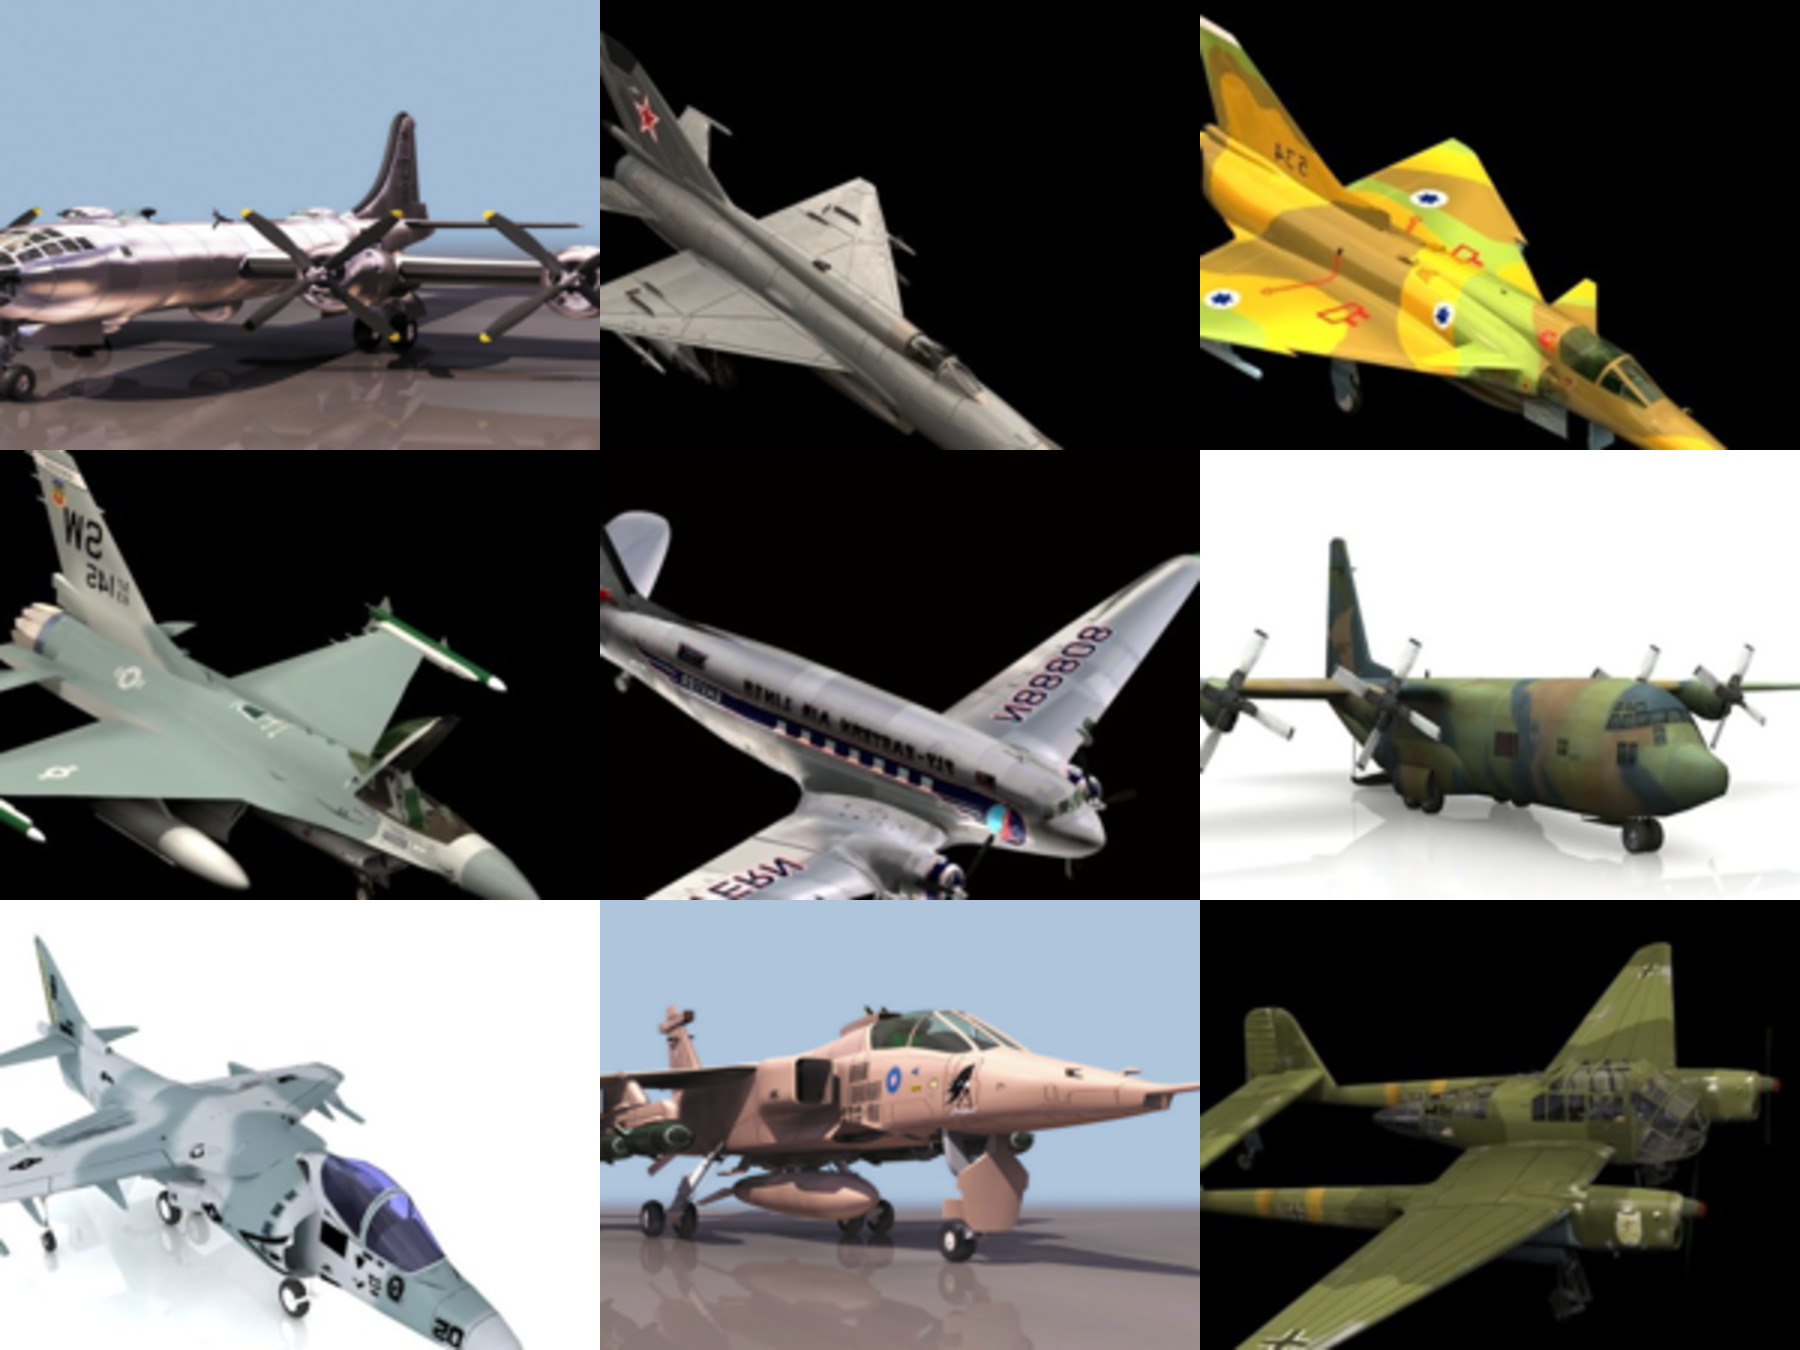 10 Military Aircraft Free 3D Models – WW2, Bomber, Mig, Jet Fighter Plane